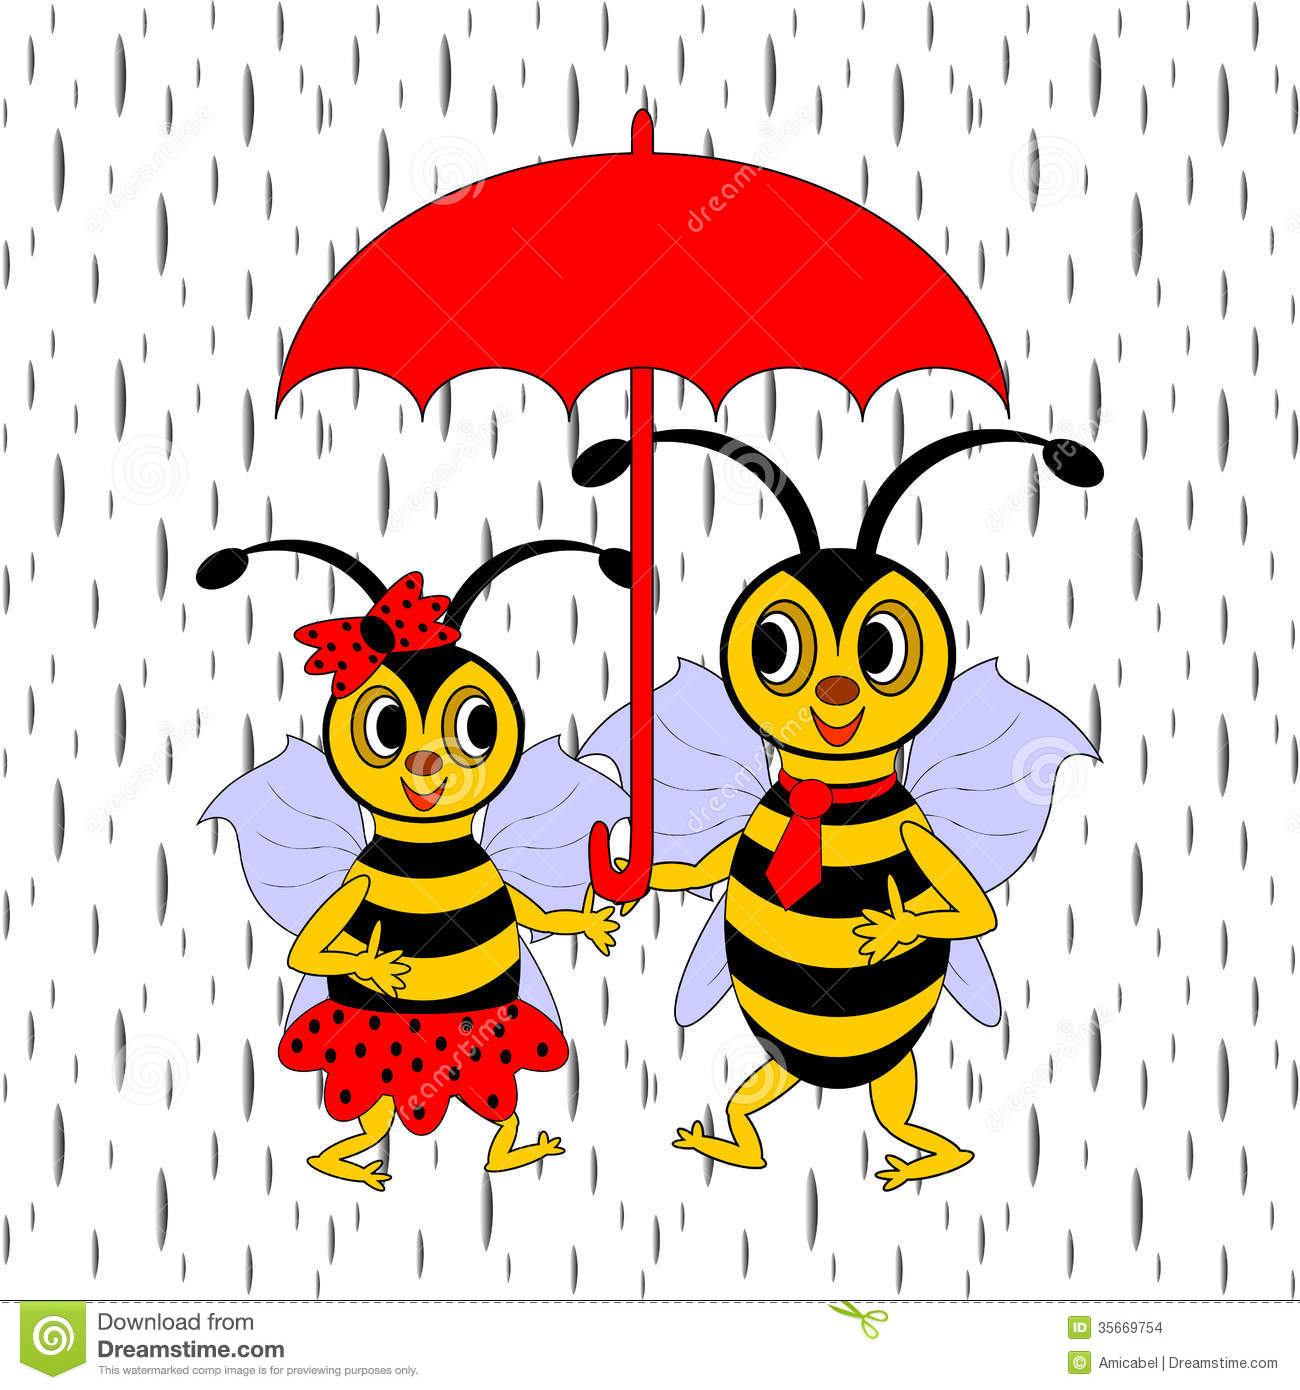 Couple Of Funny Cartoon Bees Under Red Umbrella Stock Images   Image    